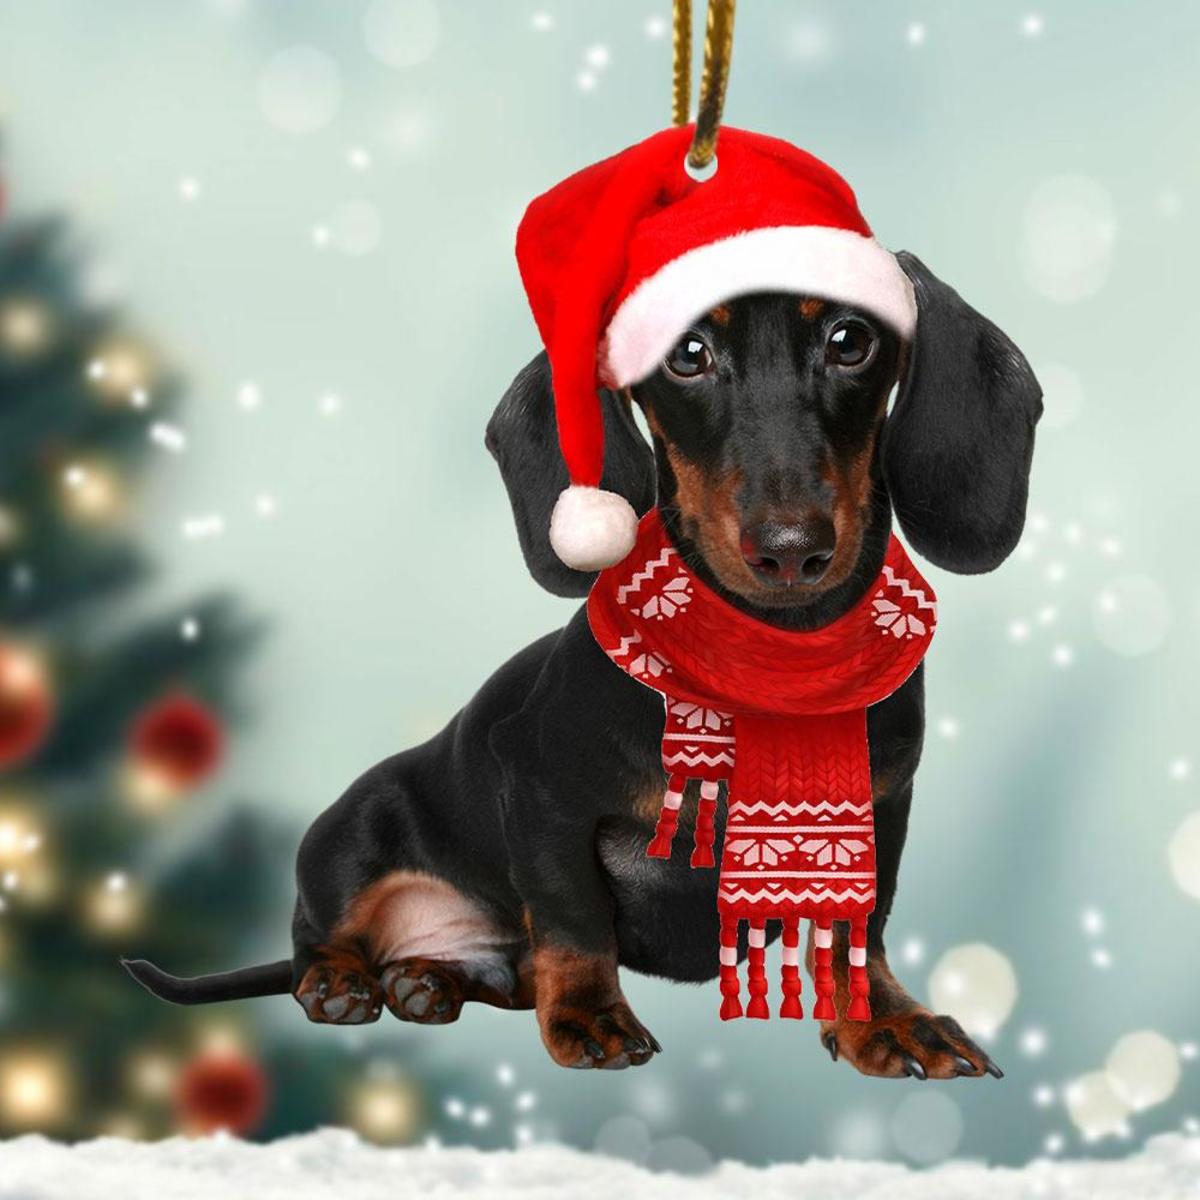 Look at this beautiful Dachshund ornament, can't you imagine it on your tree?  I can!